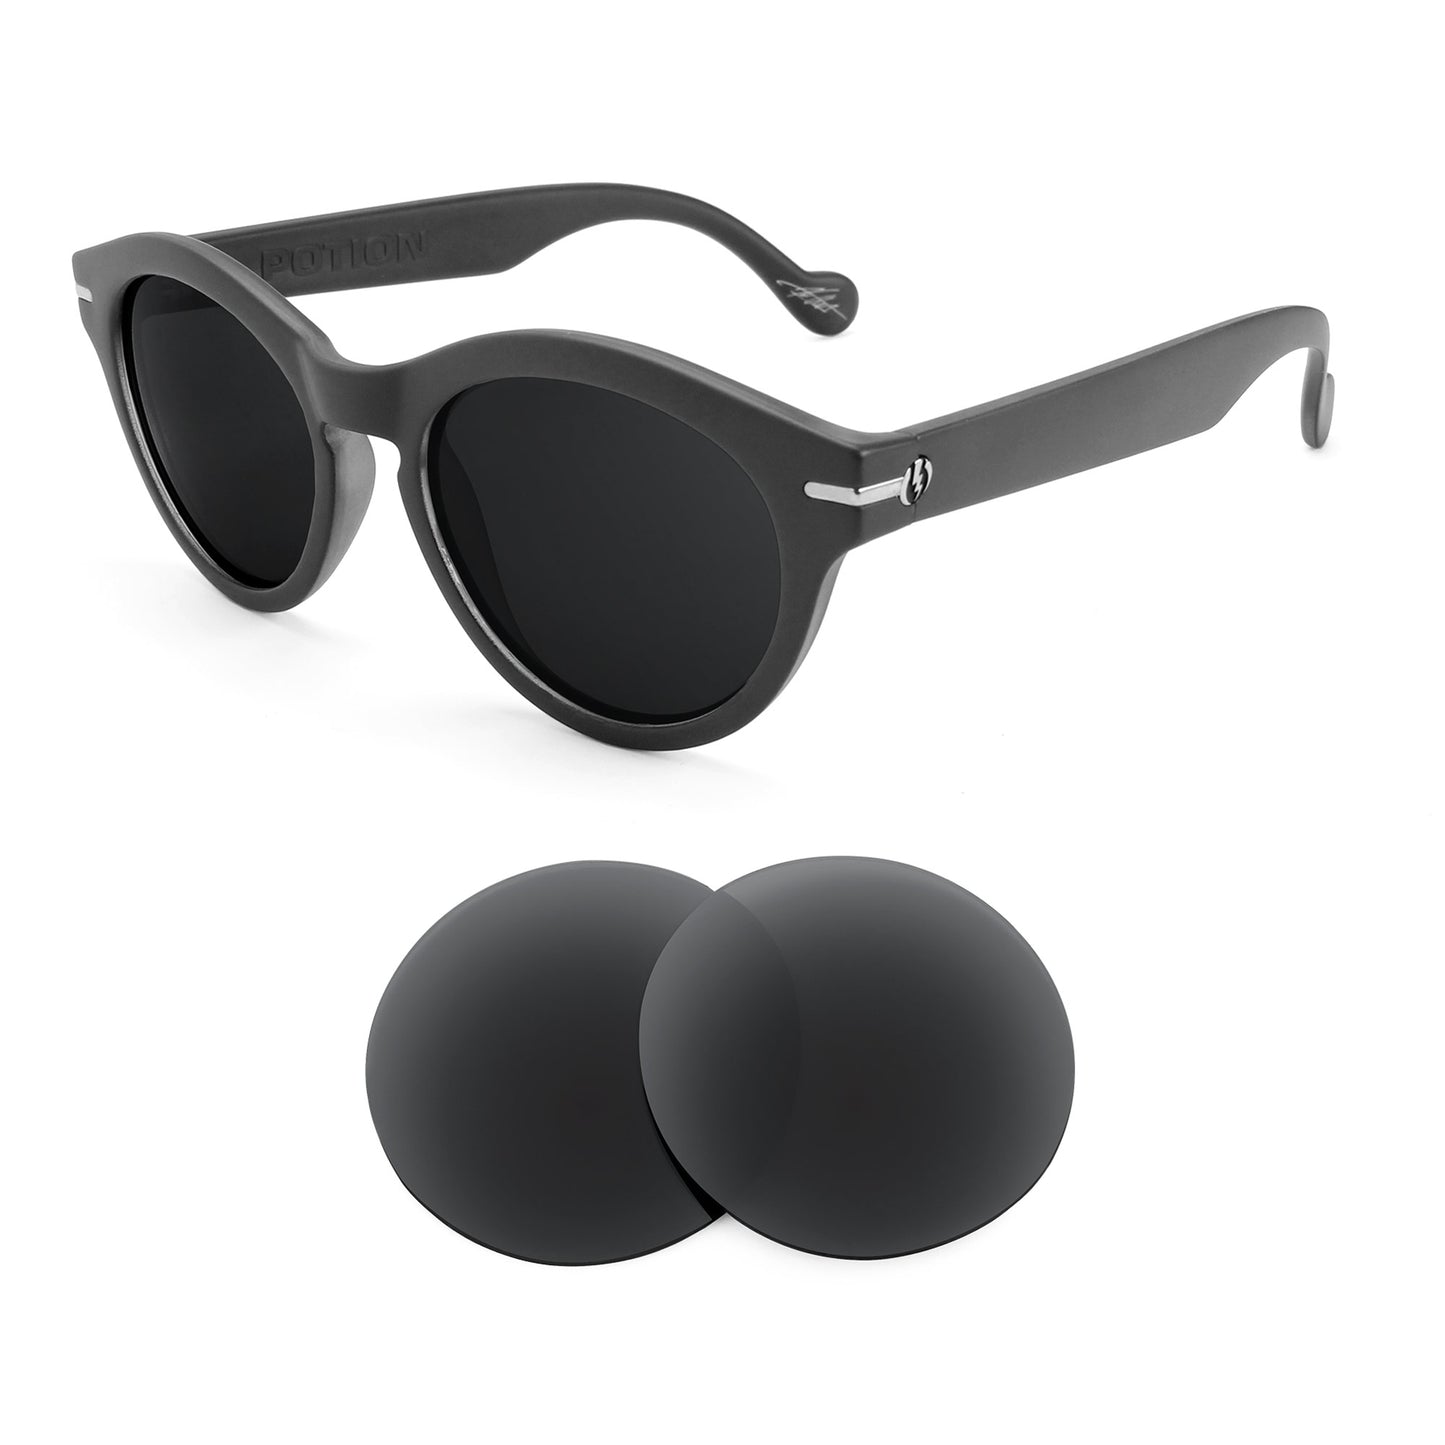 Electric Potion sunglasses with replacement lenses